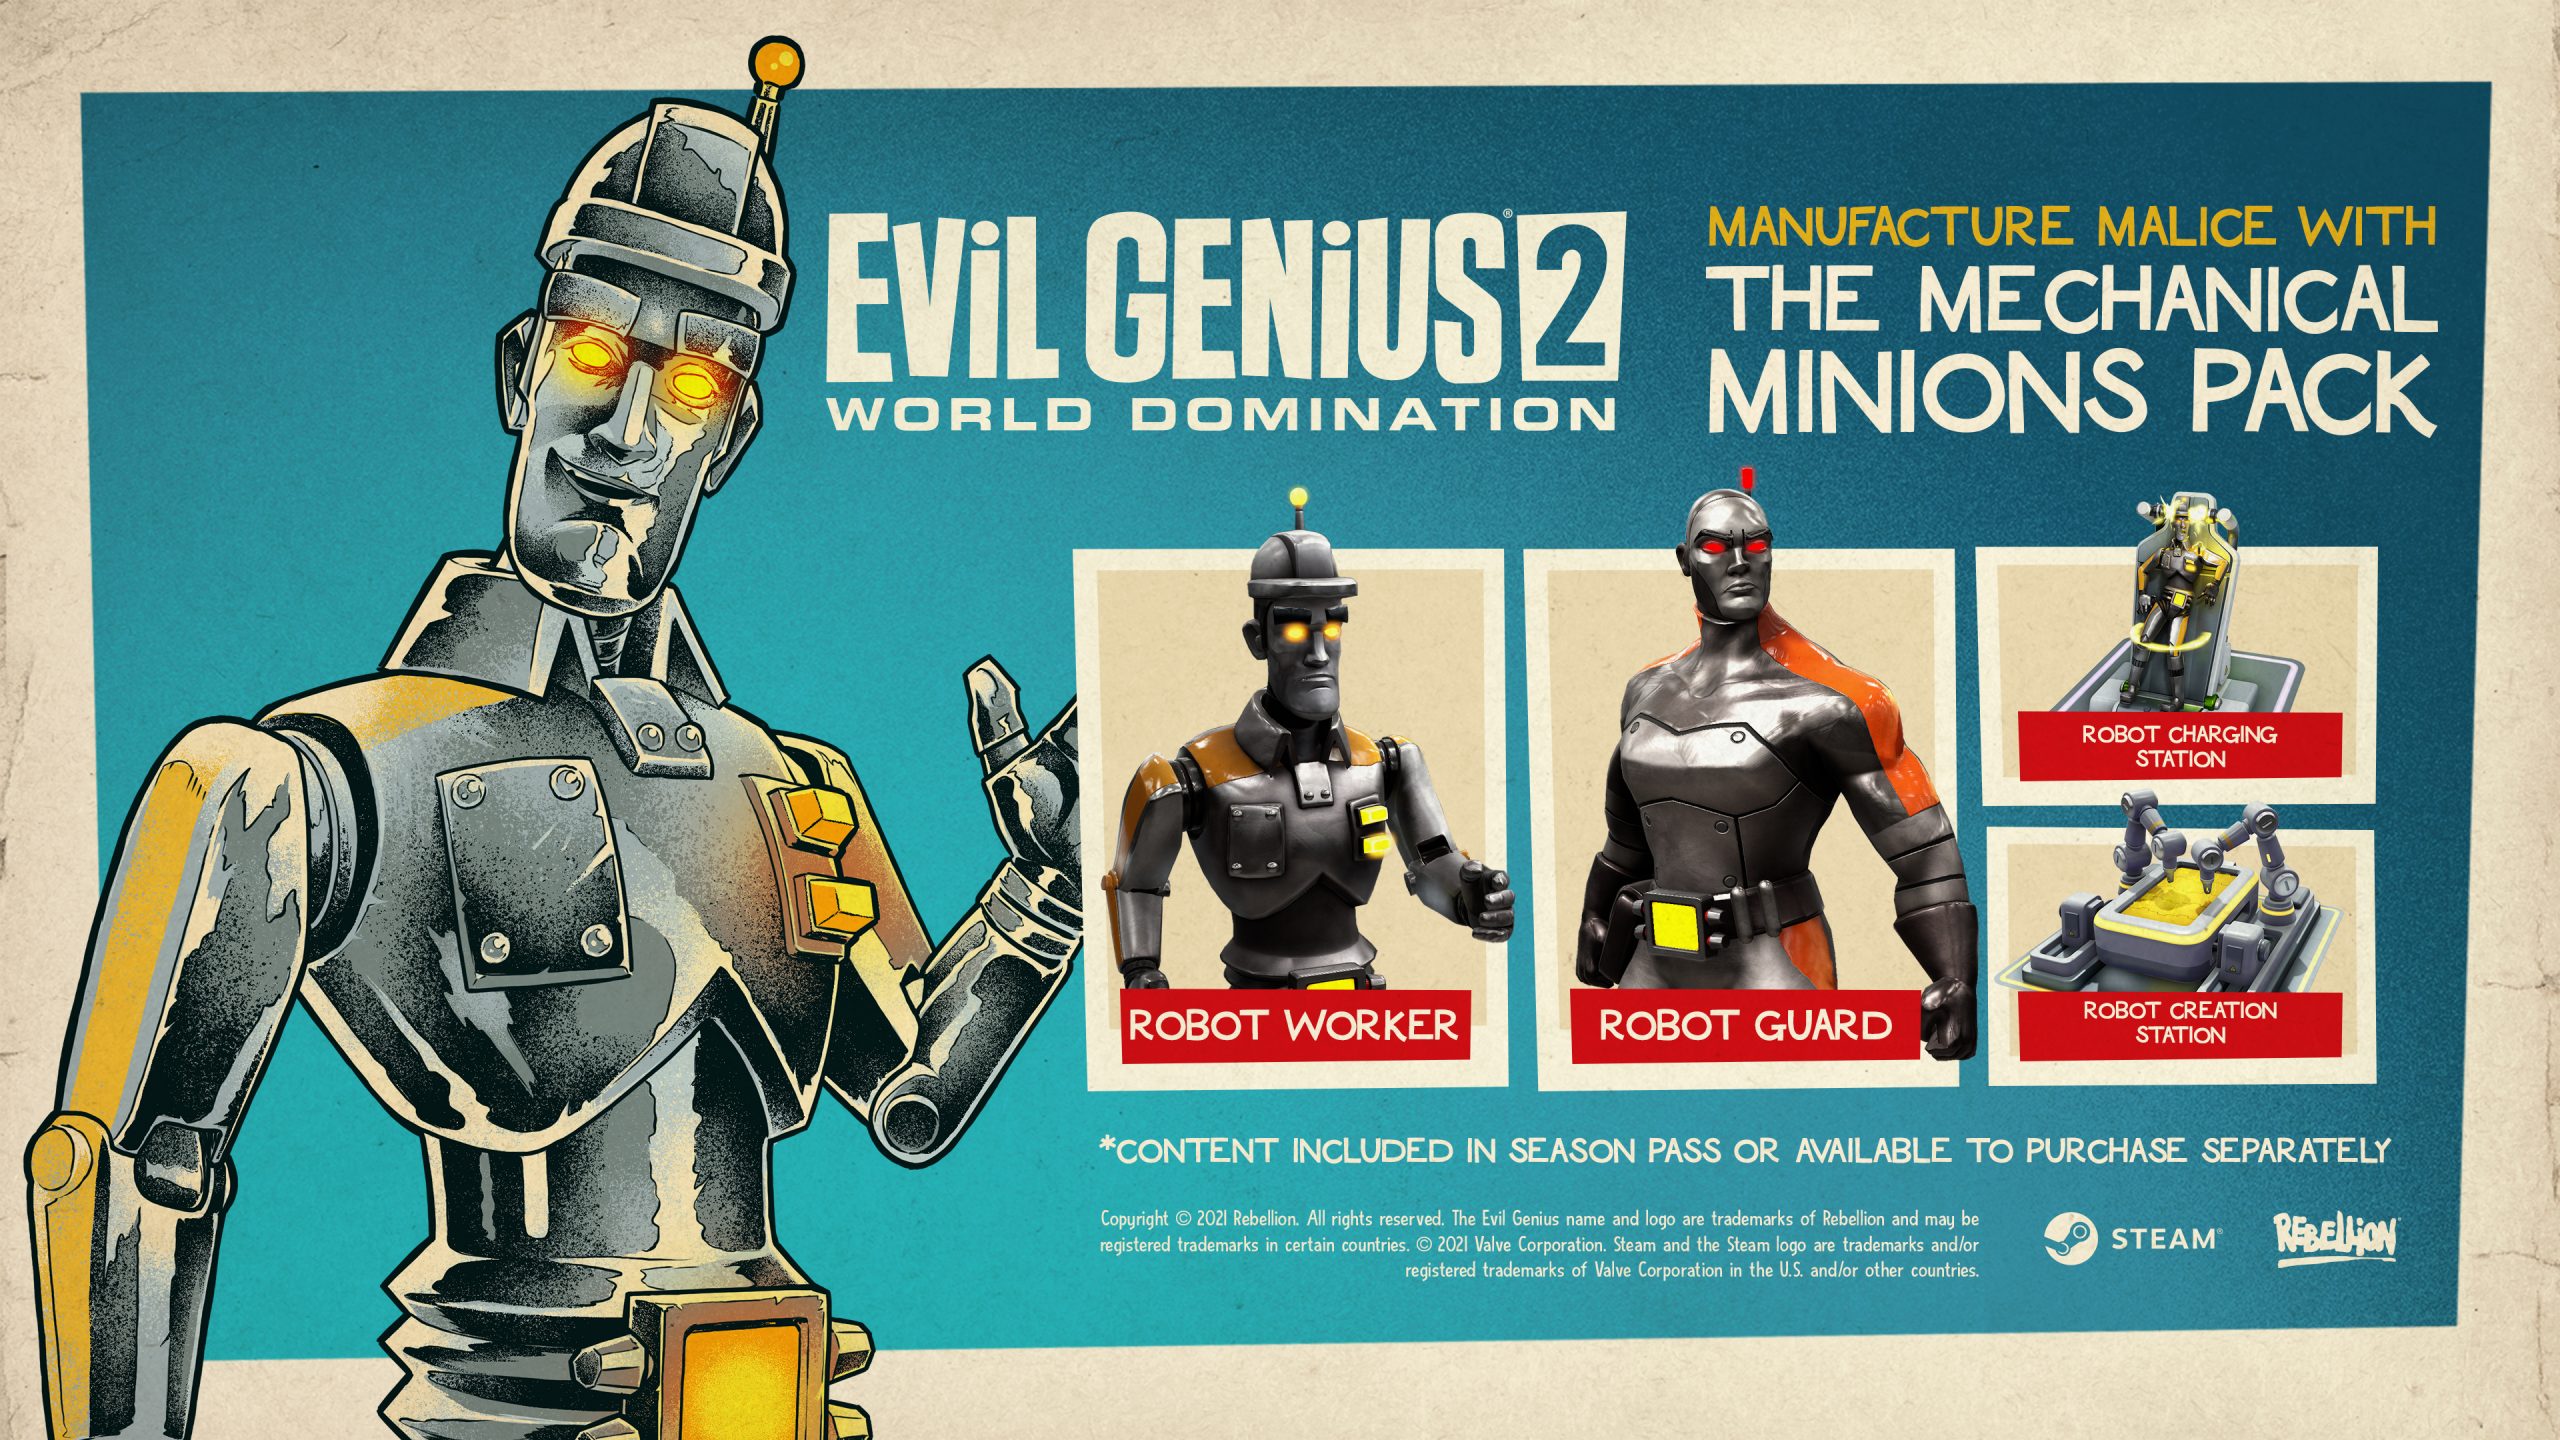 Image of Evil Genius 2 'Machanical Minions' Downloadable content, content included with season pass or can be purchased seperately